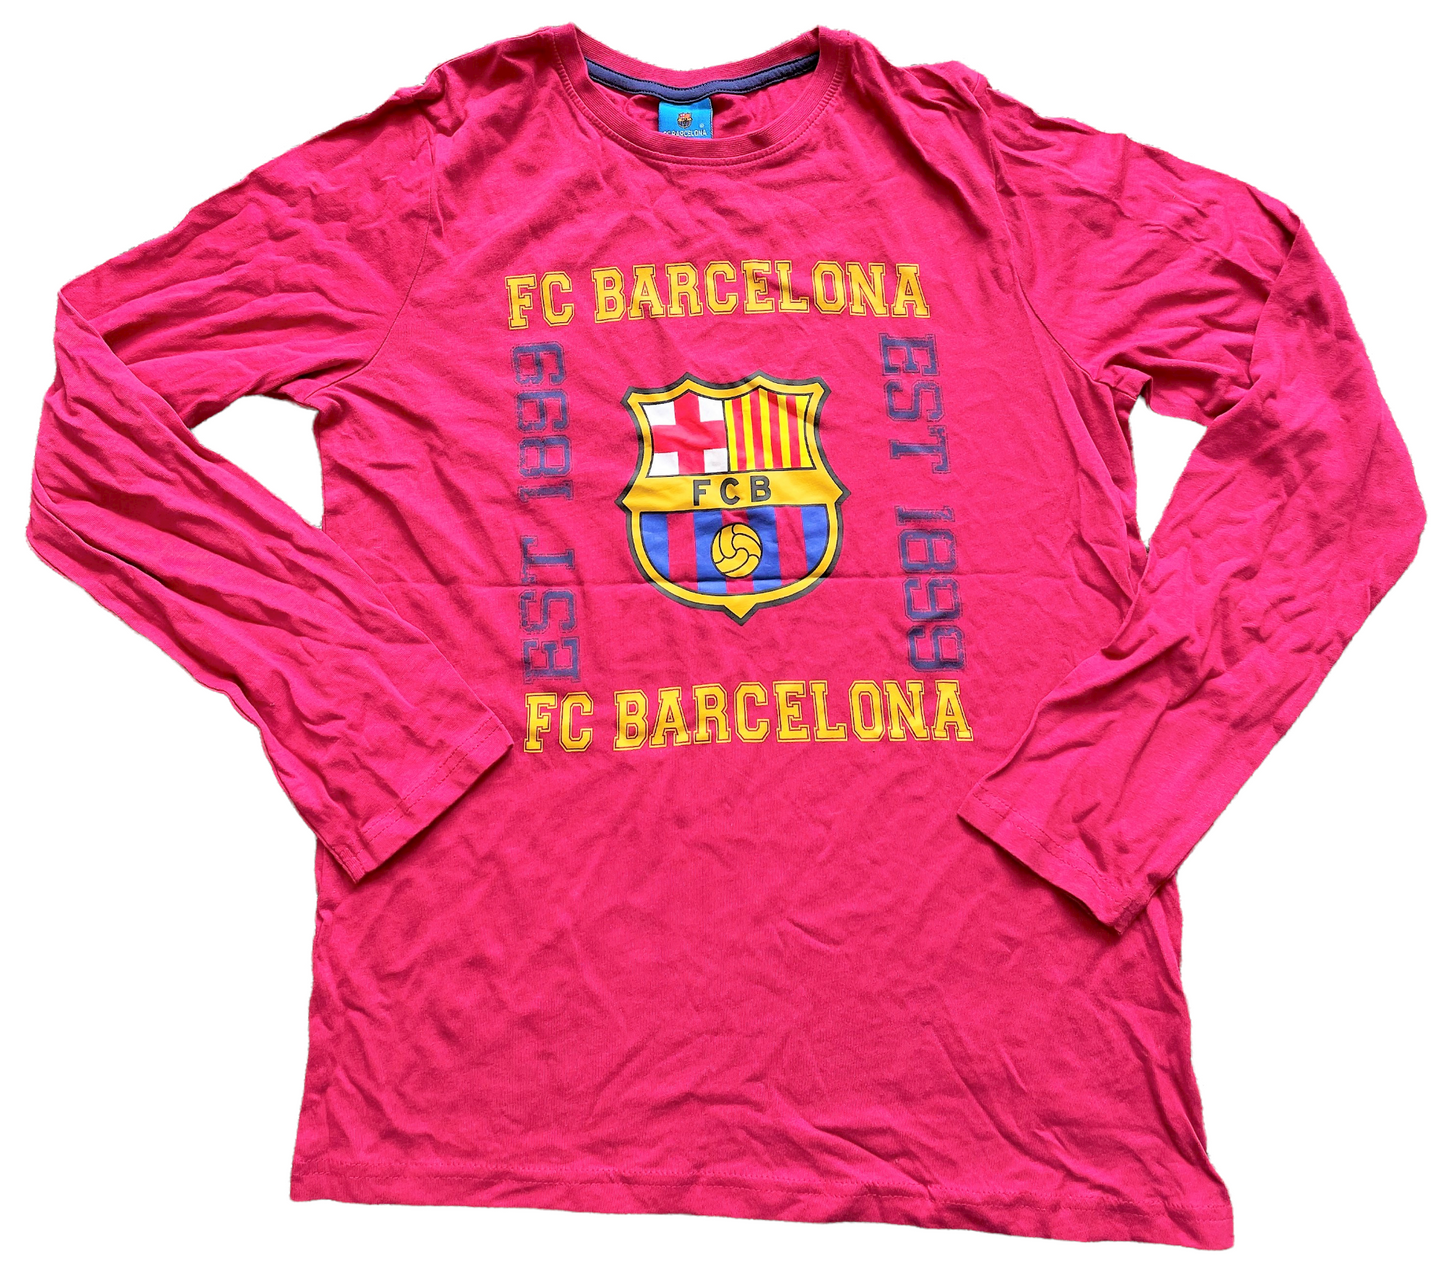 Barcelona Fan Top (excellent) Youths age 13 to 14